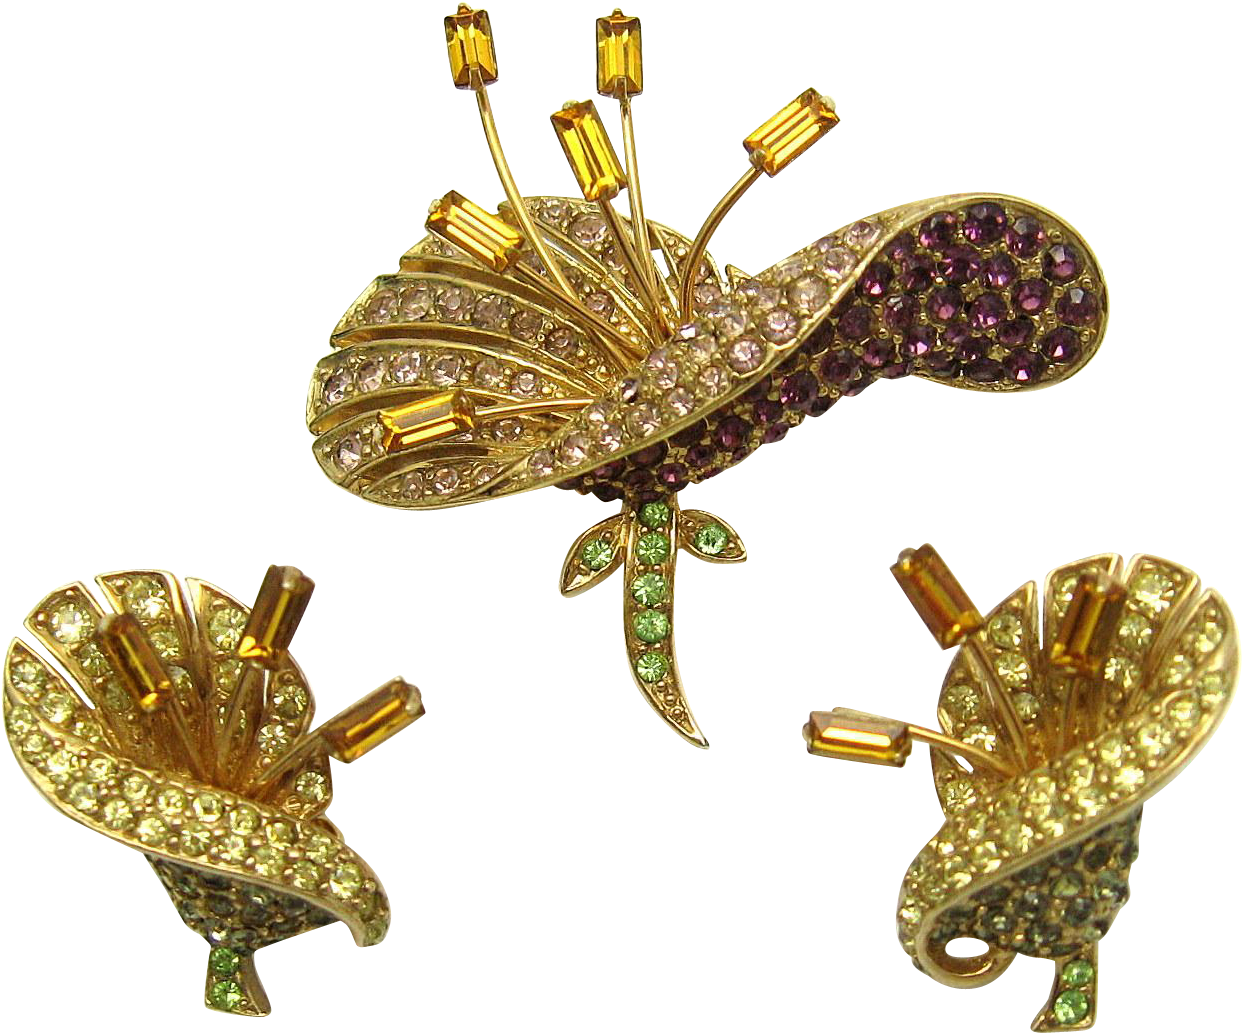 Unique And Rare Boucher Set Of Brooch And Earrings - Brooch (1241x1241)